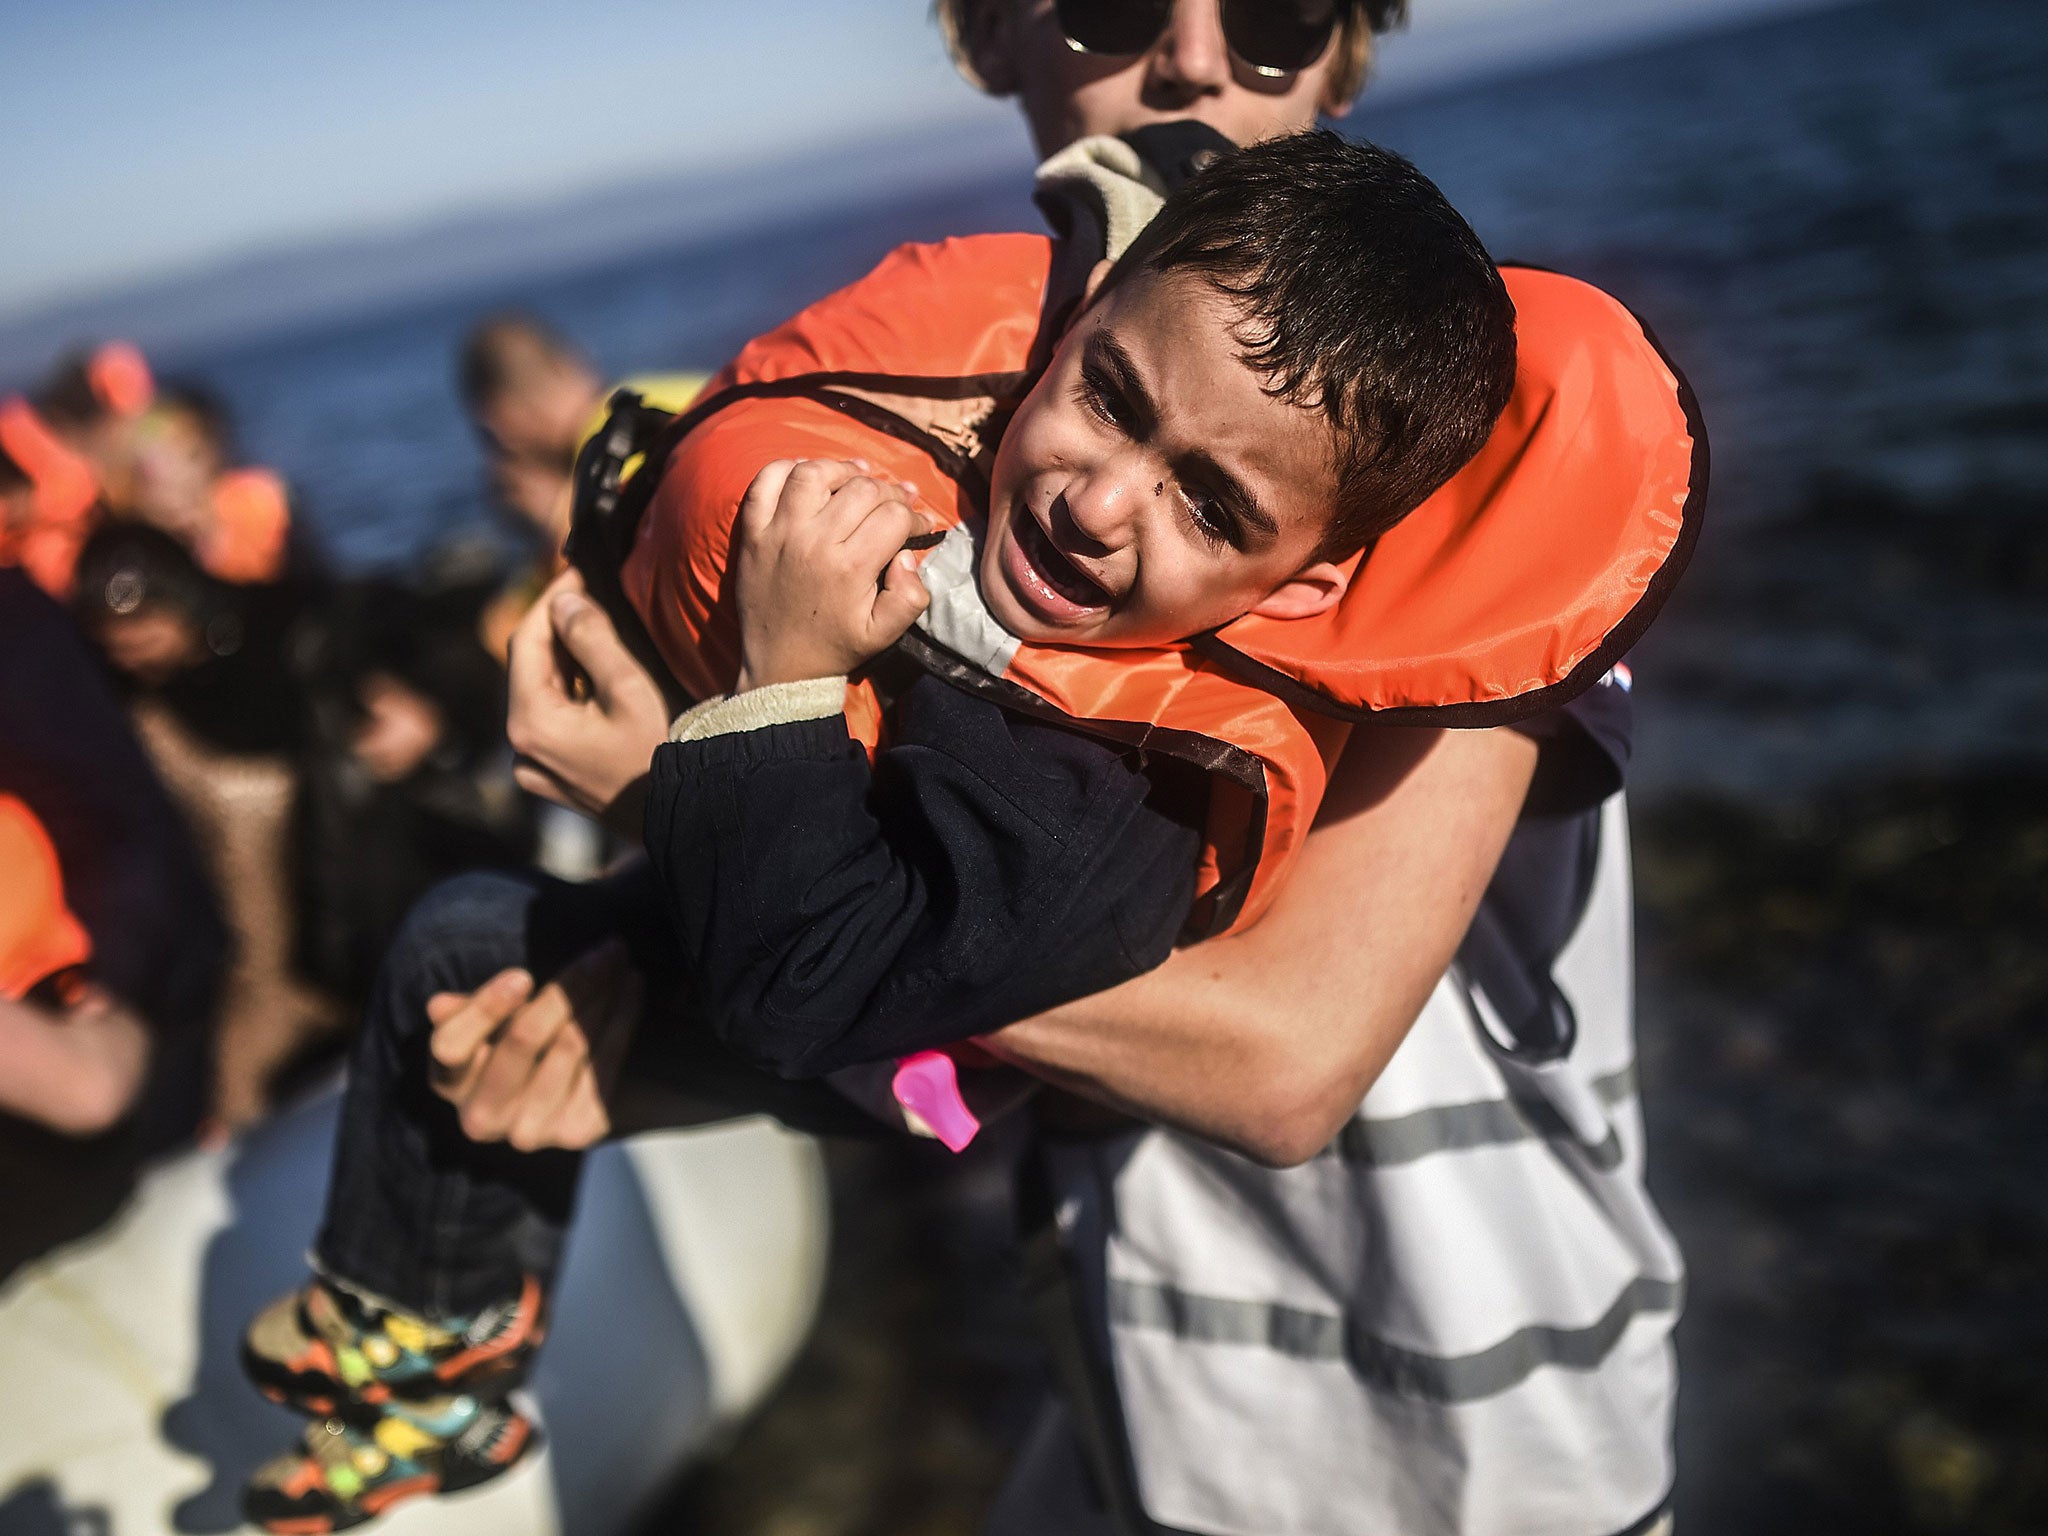 Refugees, many of whom started their journey in Syria, arrive in Lesbos from Turkey